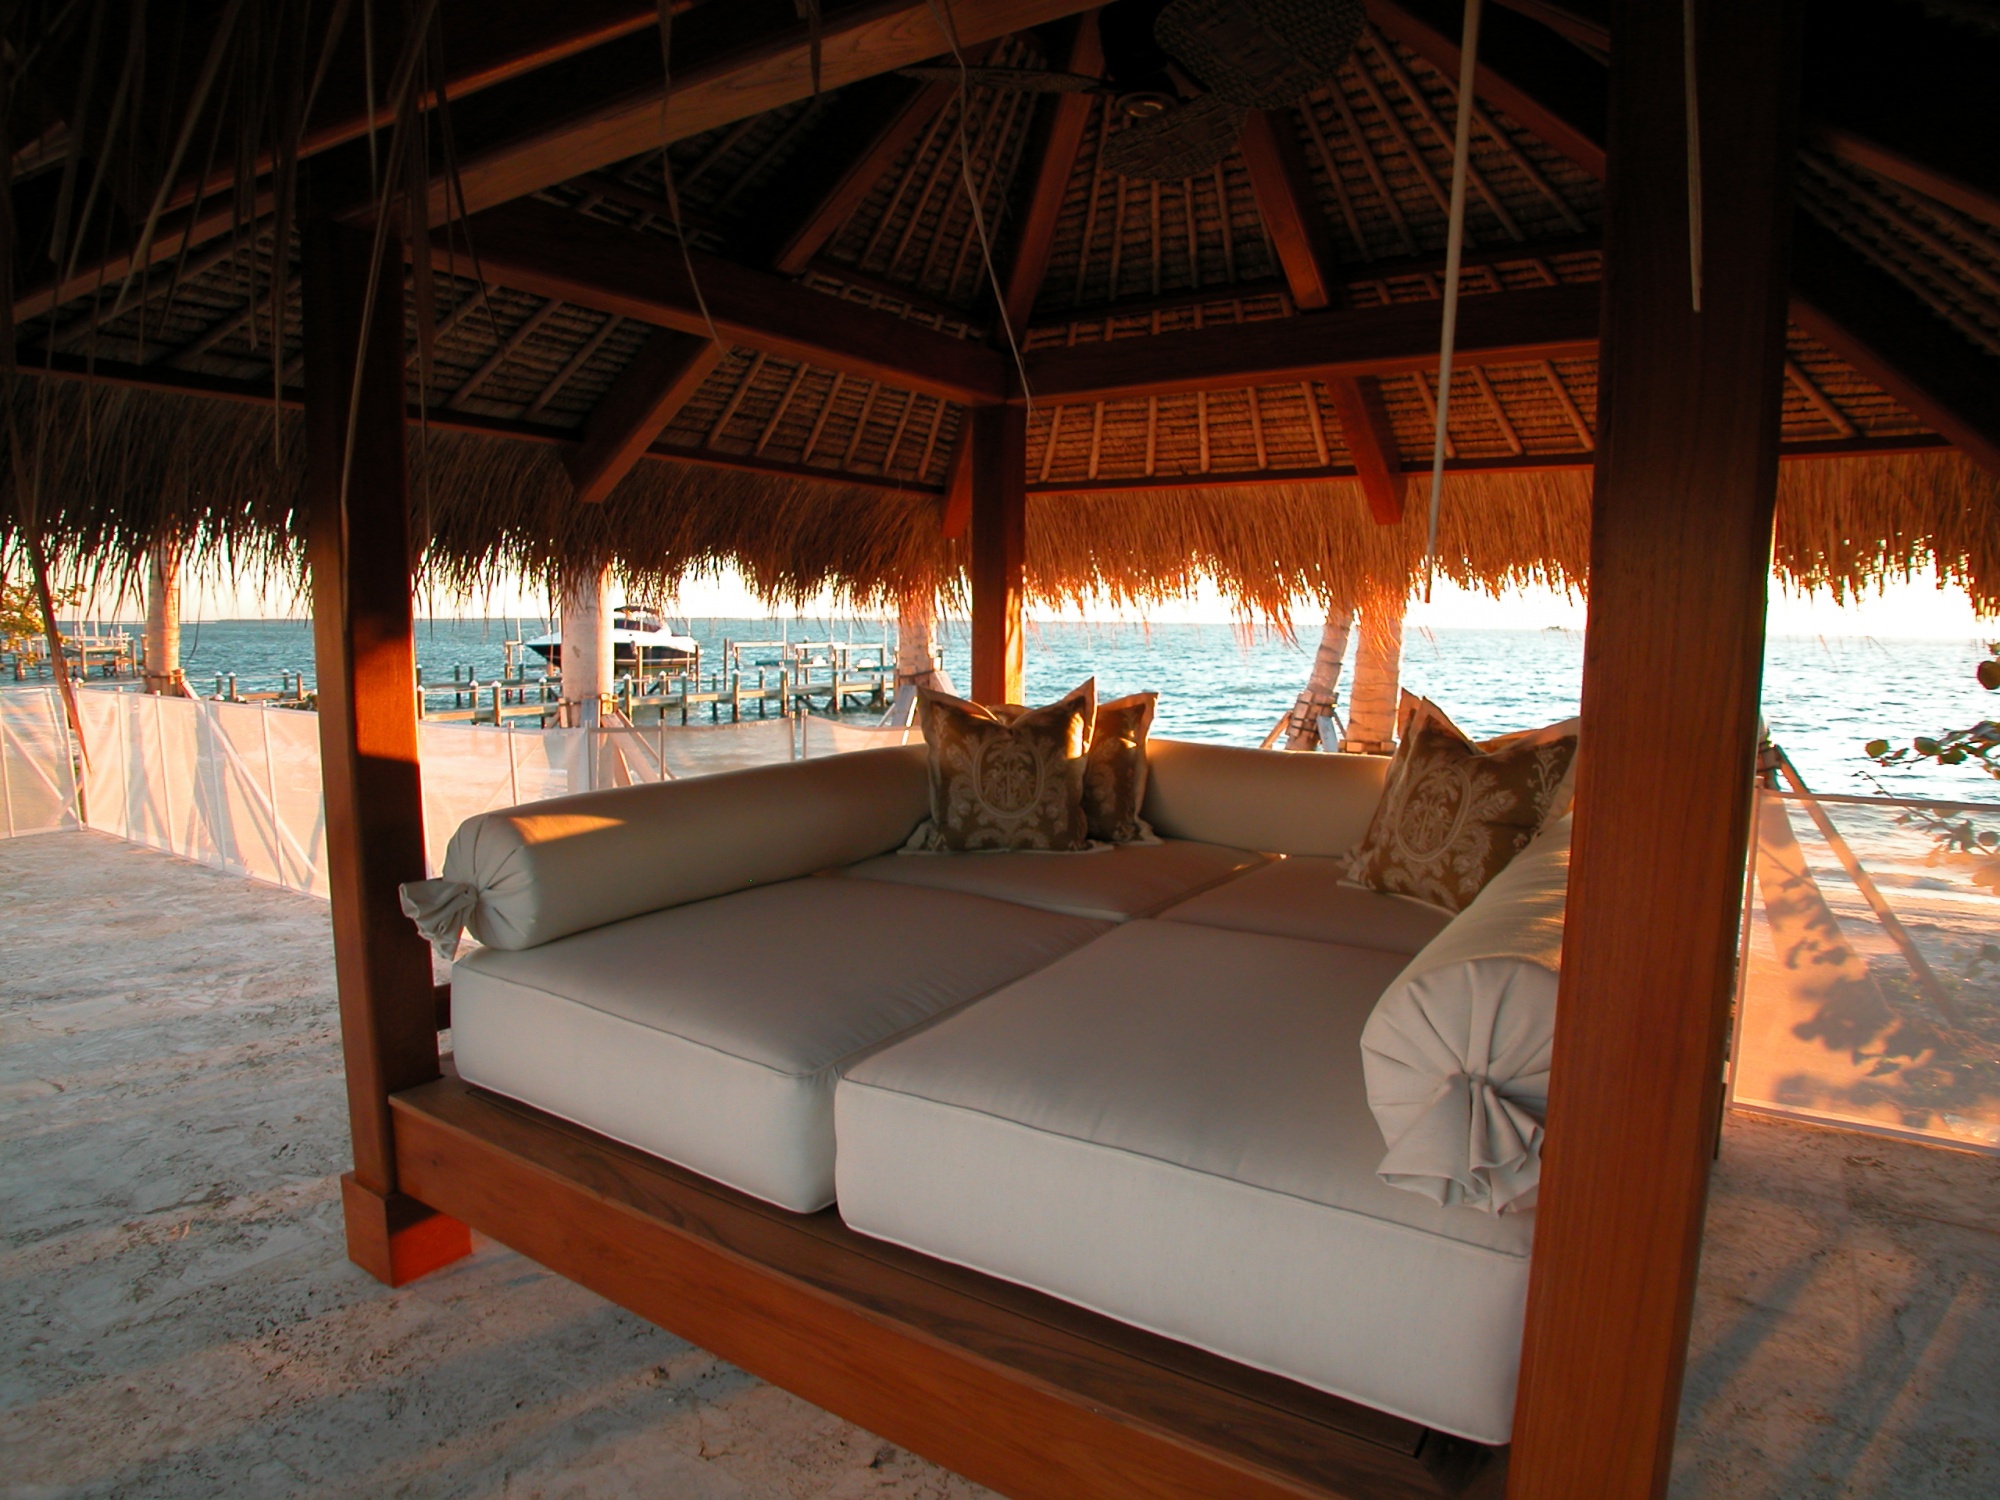 Authentic thatched roof with bamboo and mahogany rafters provide shelter on this oceanside day bed.